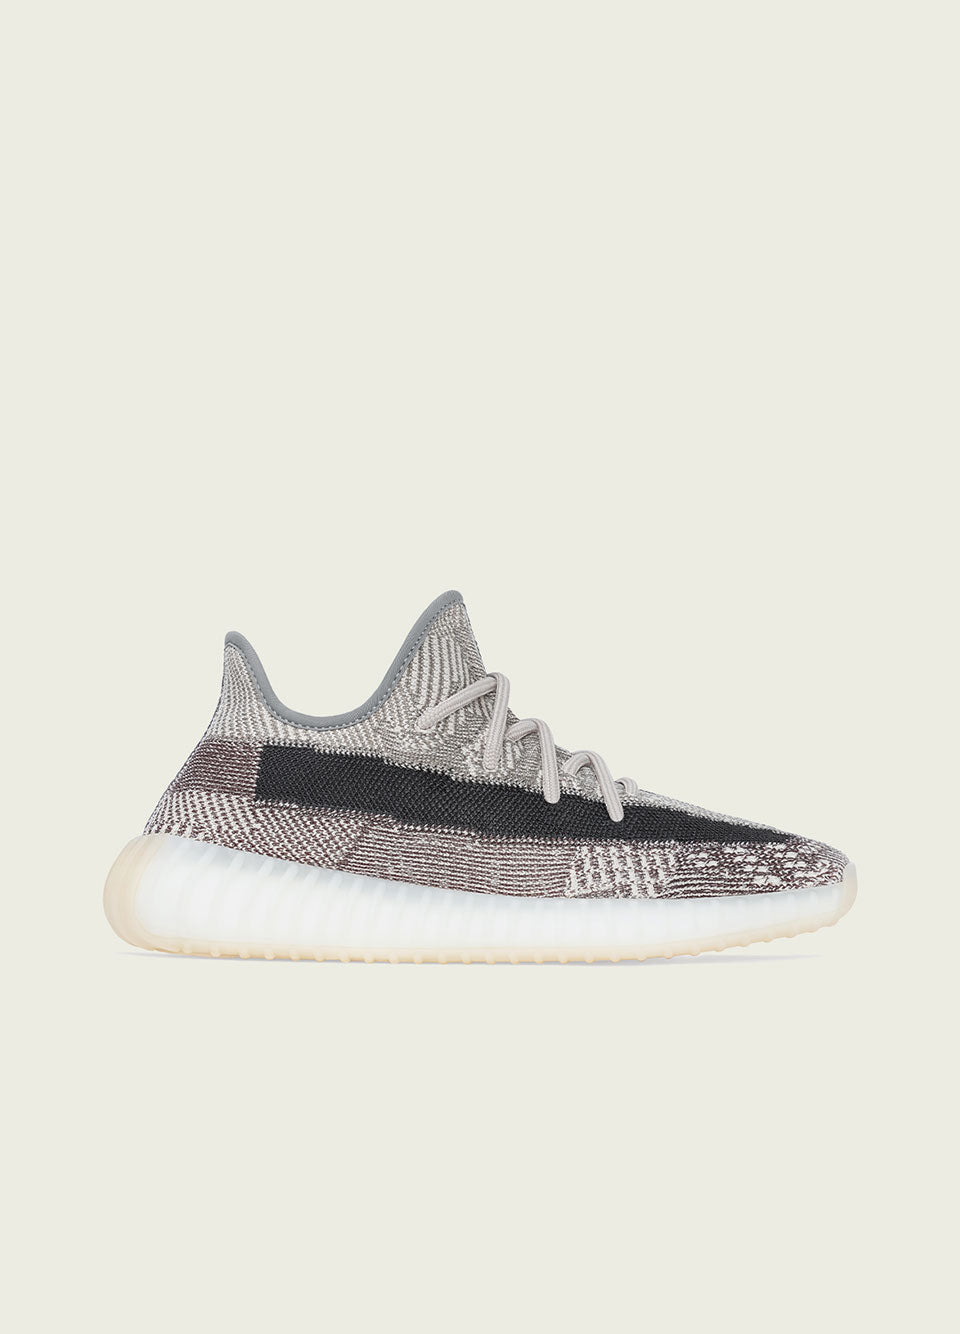 adidas Yeezy Boost 350 V2 Zyon --launch-date--2019-07-16